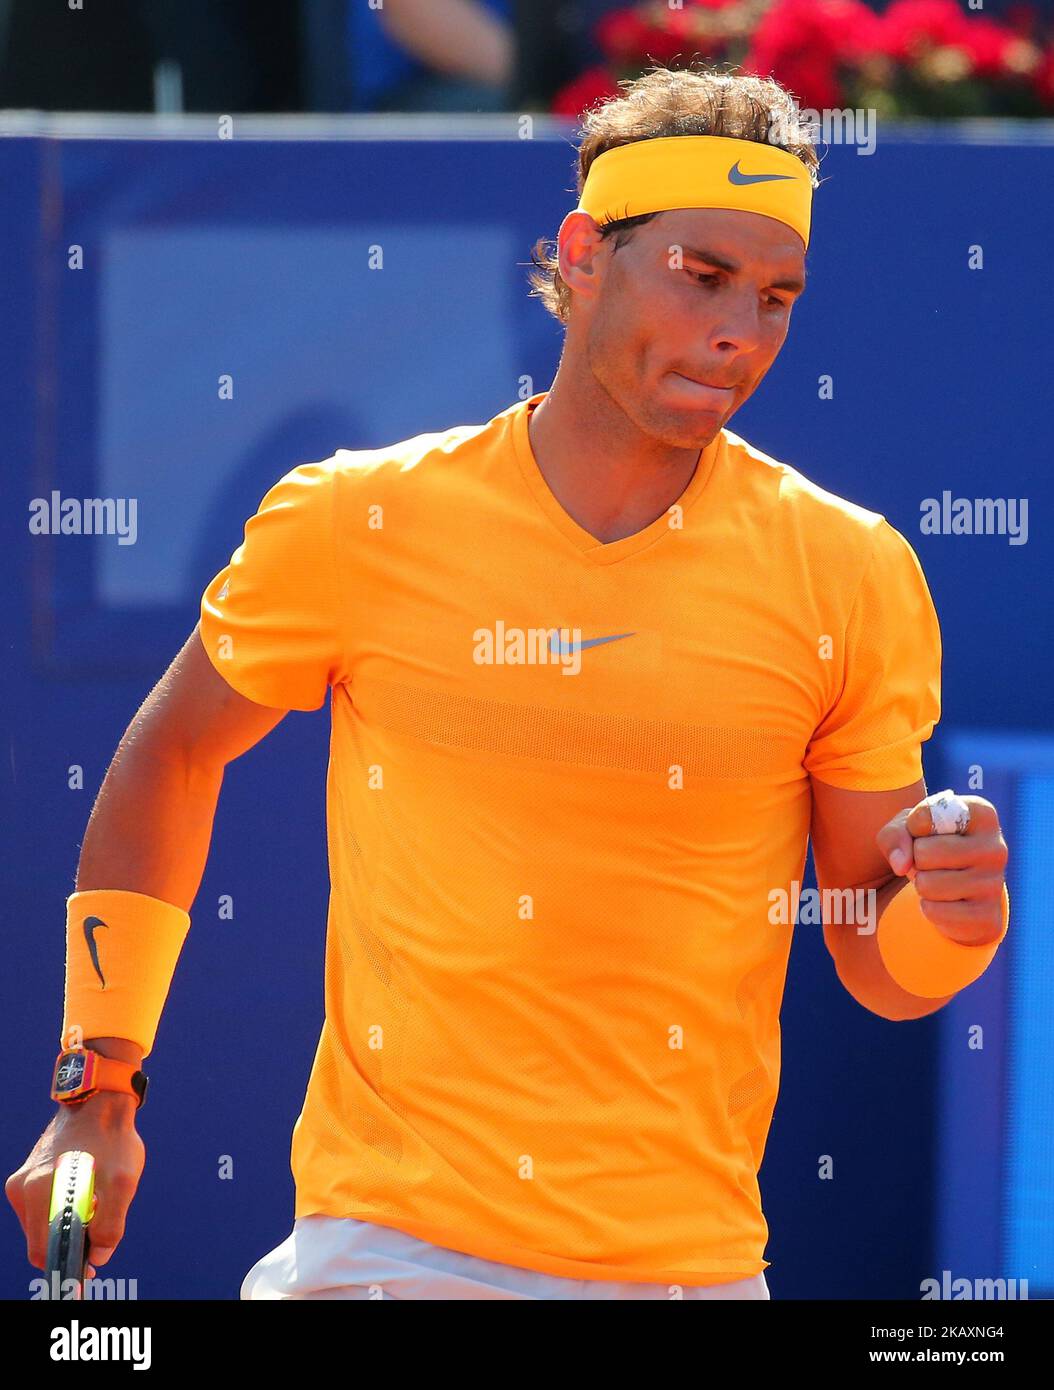 Rafa Nadal during the match between Guillermo Garcia Lopez during the Barcelona Open Banc Sabadell, on 26th April 2018 in Barcelona, Spain. -- (Photo by Urbanandsport/NurPhoto) Stock Photo